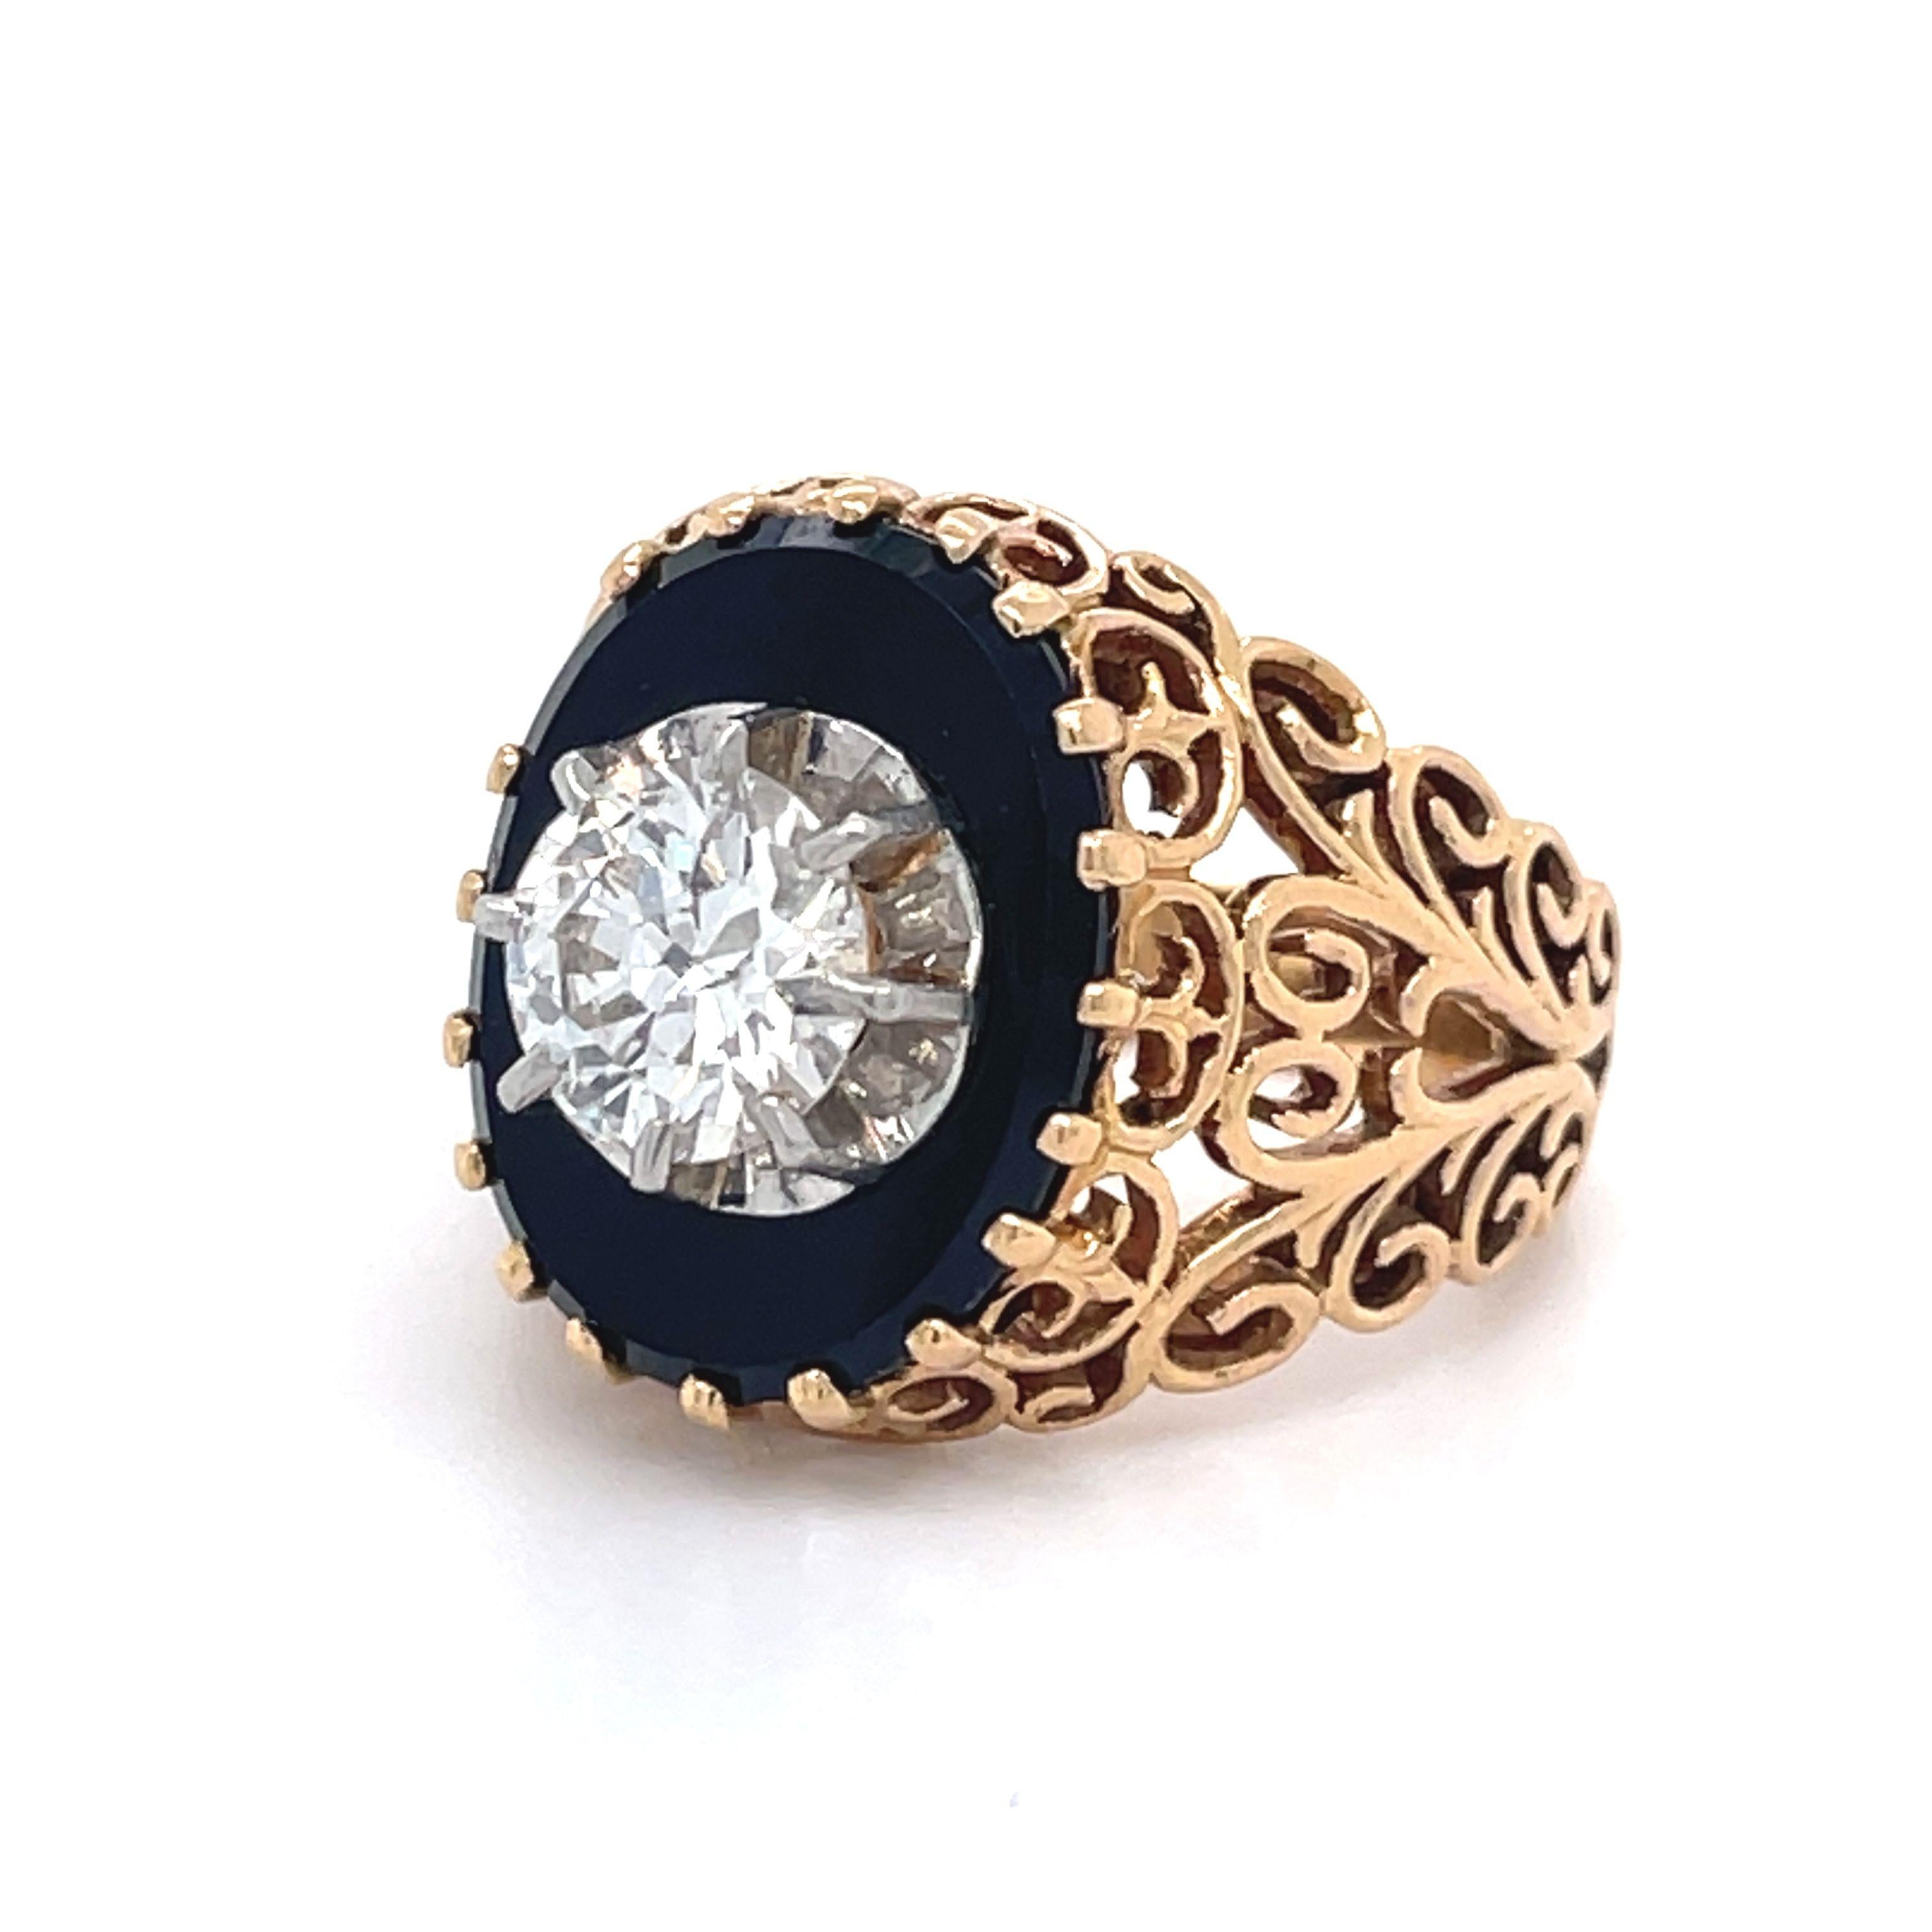 FILIGREE RING -Onyx and Diamond Estate Unisex Ring 1 CT Round Cut Natural Diamond, Solid 18k Yellow Gold, Vintage Ring, Hand Made 
 
~~ S e t t i n g ~~
Solid 18k Yellow Gold
9.2  grams
Ring Size 4.5 US
 
~~ Stones ~~
Main Stone:
Round Cut Natural